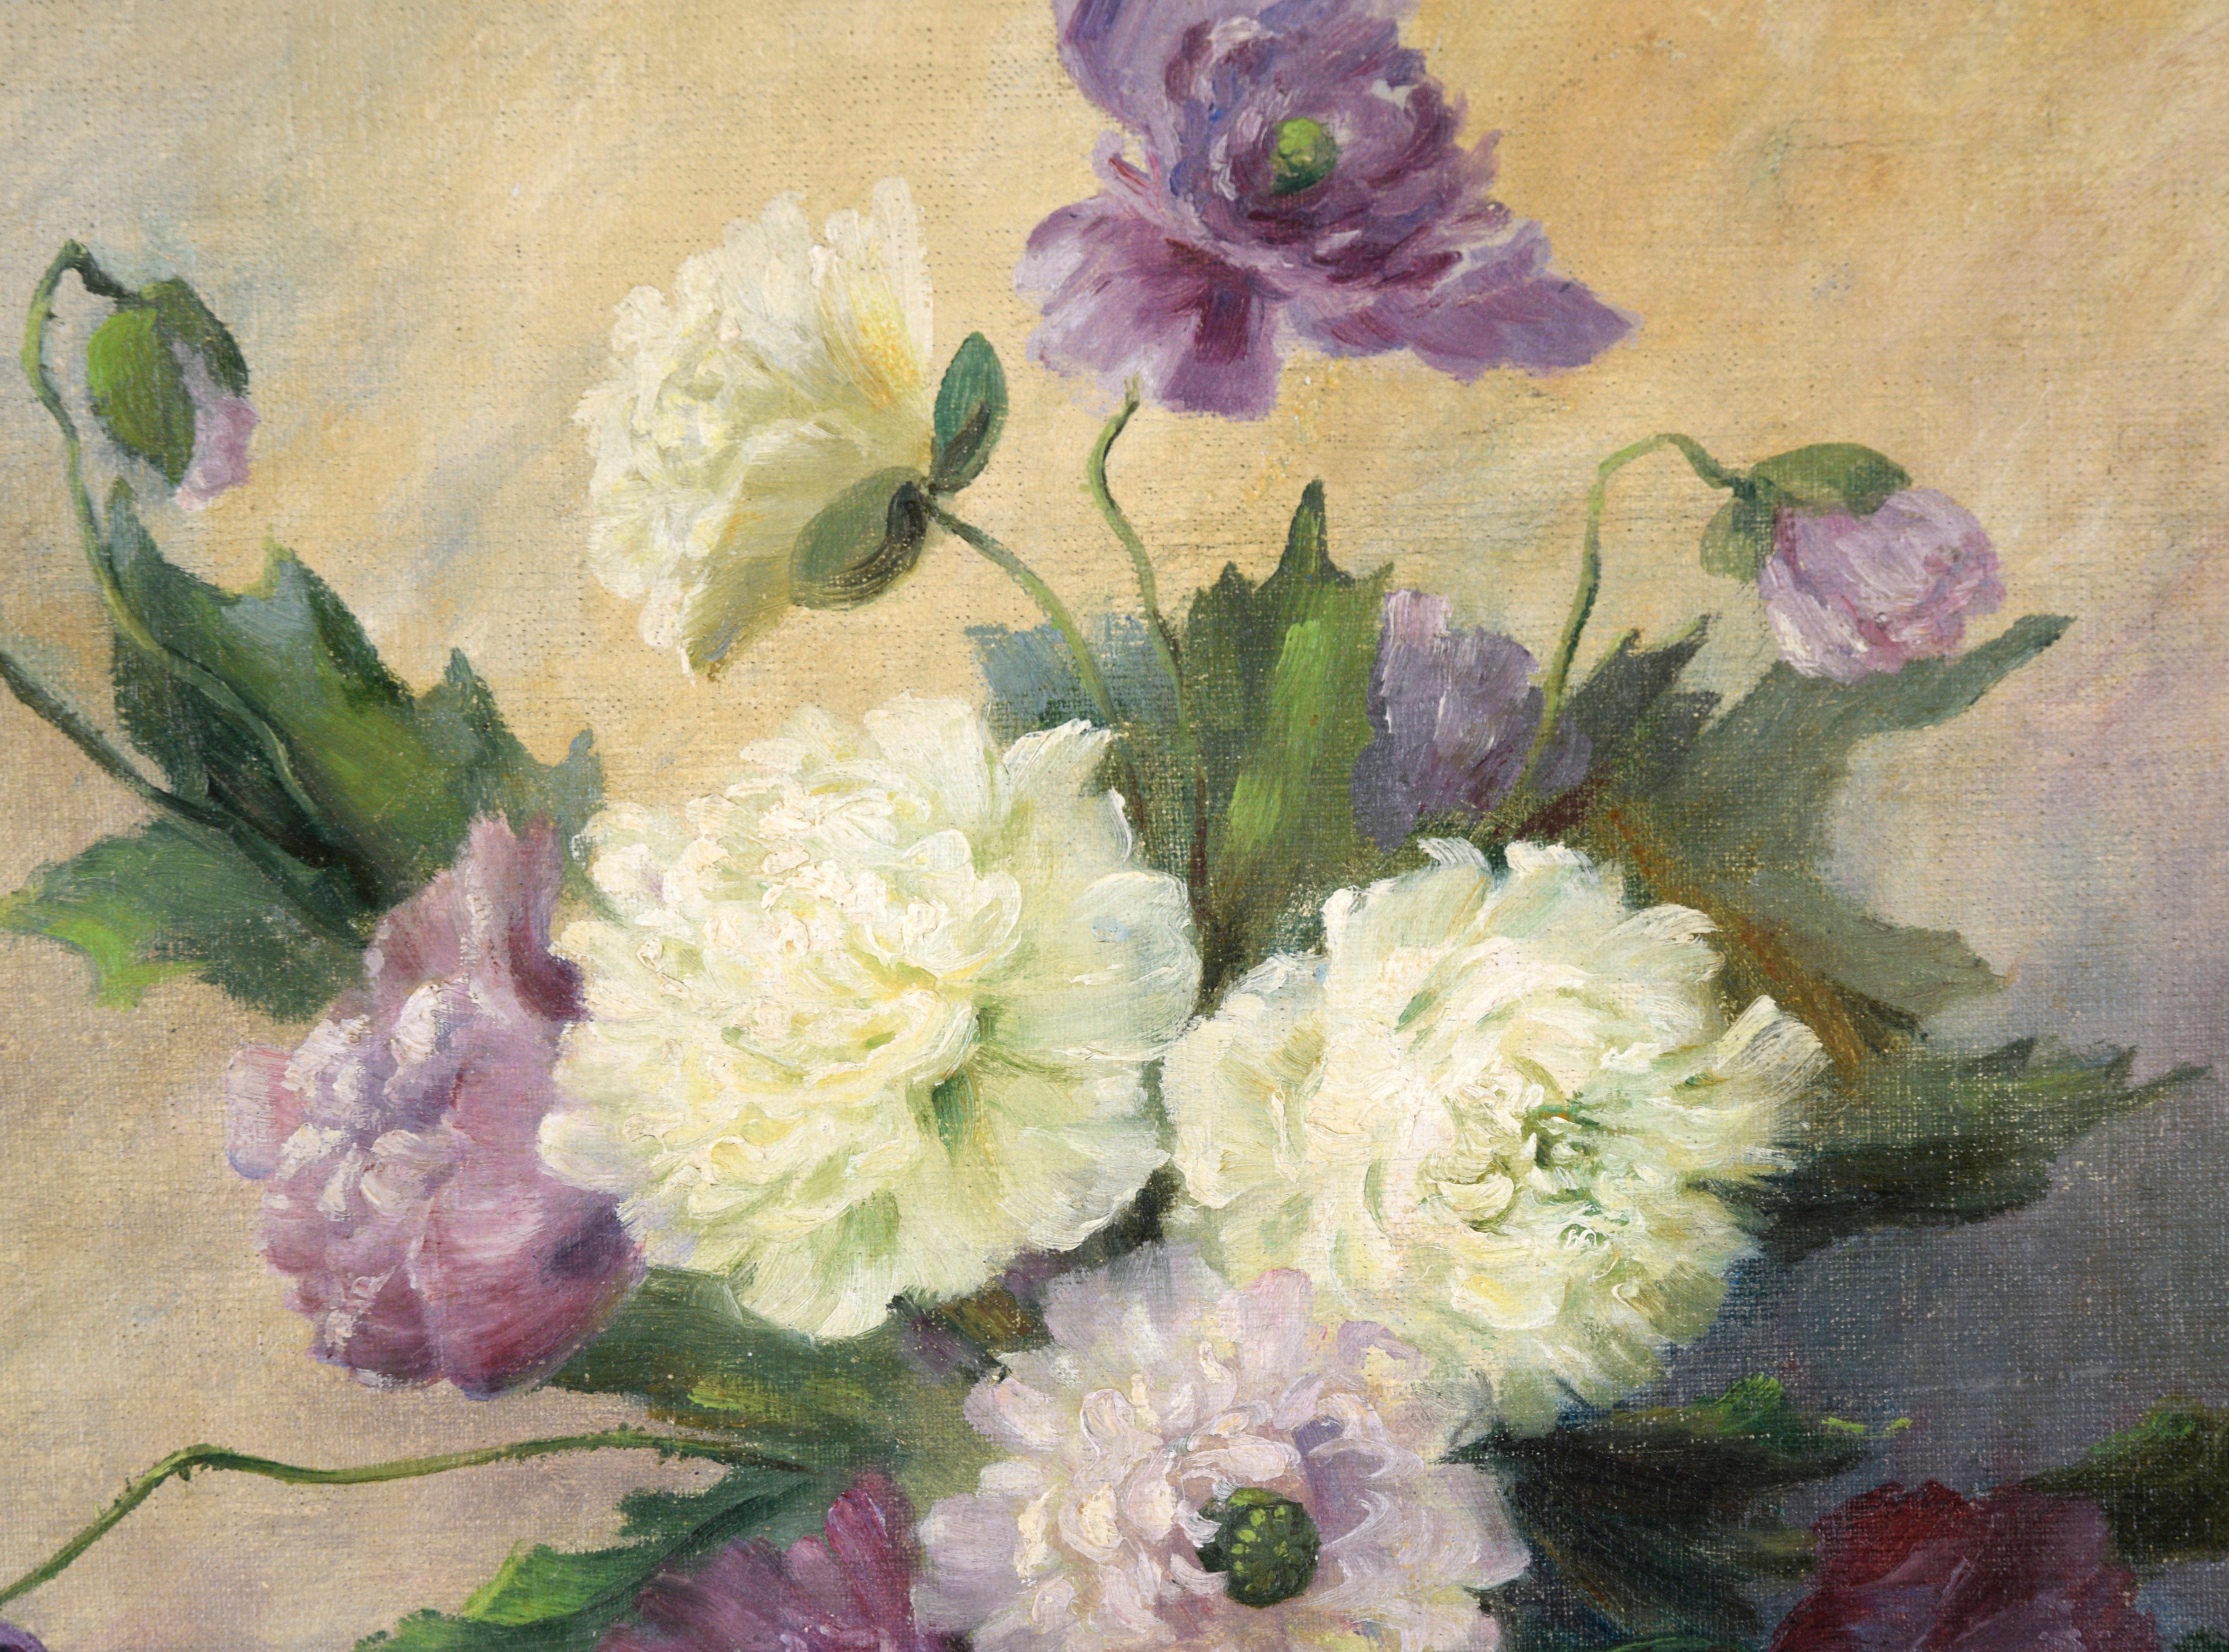 White and Purple Dahlias - Floral Still Life in Oil on Illustration Board

Delicate still life of dahlias in a green vase by Gertrud Stimming (Germany, b-1880s). Several white and purple flowers sit in a vase with other foliage. The pedals and